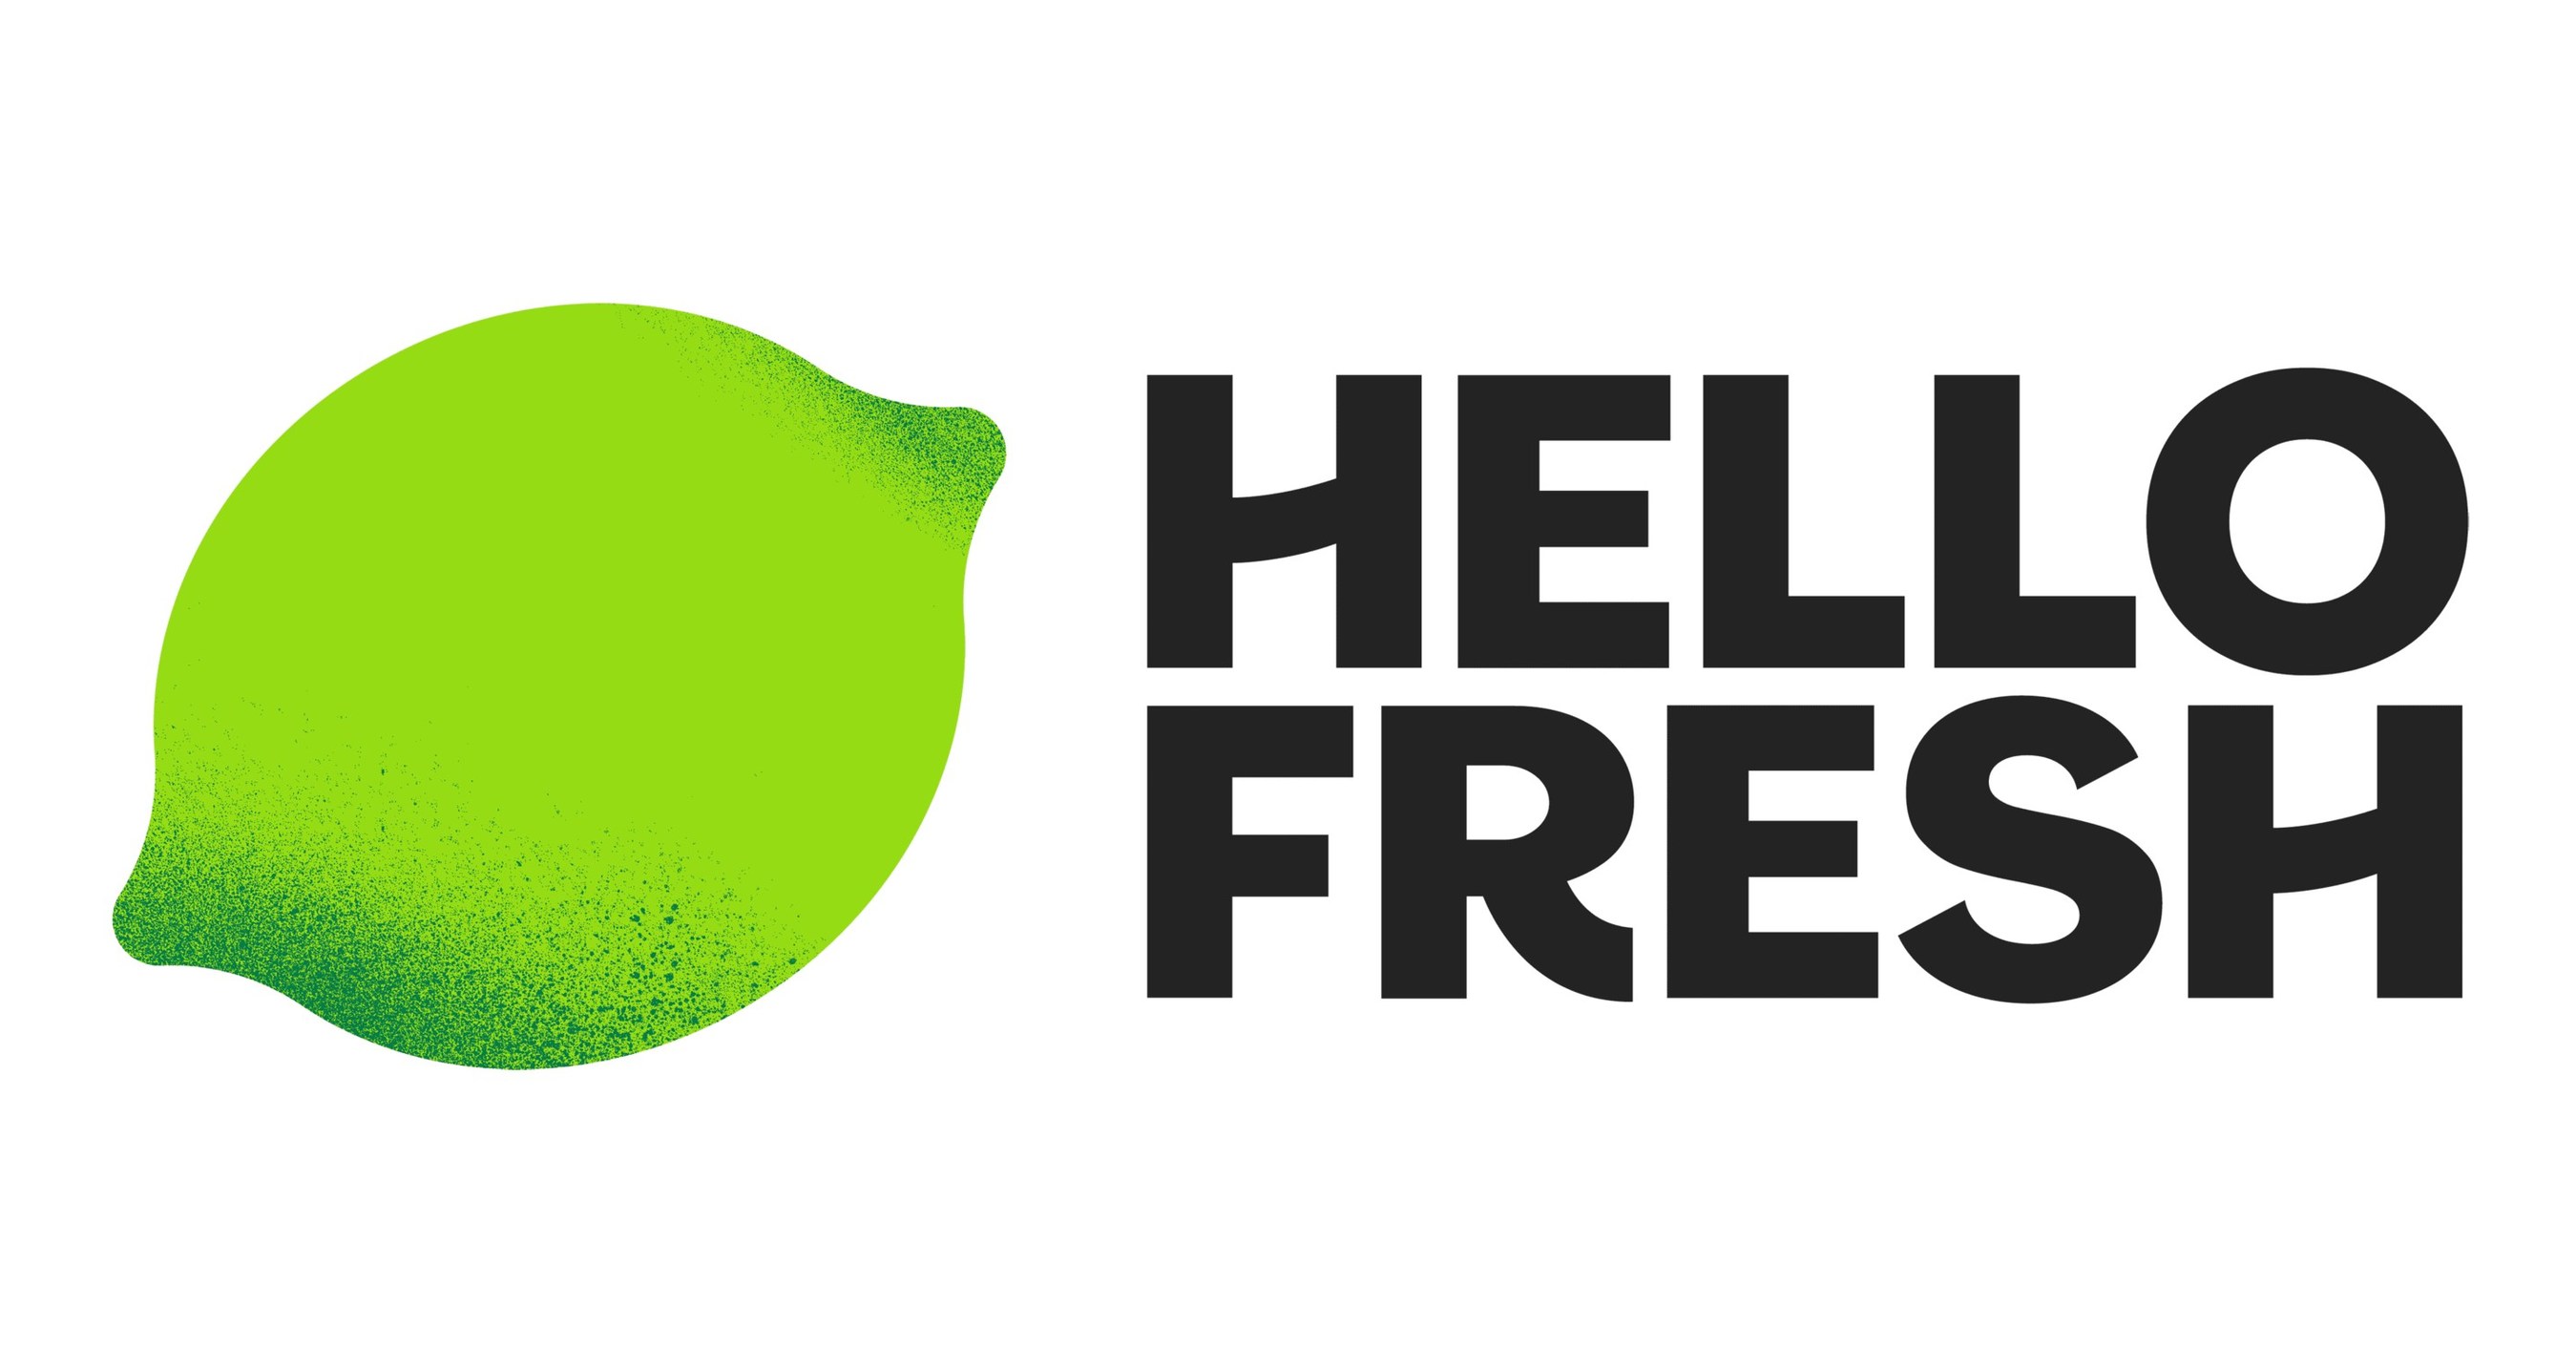 Axiom Cloud Saved the World's Leading Meal-Kit Provider HelloFresh Over $71,000 At Its Pilot Site